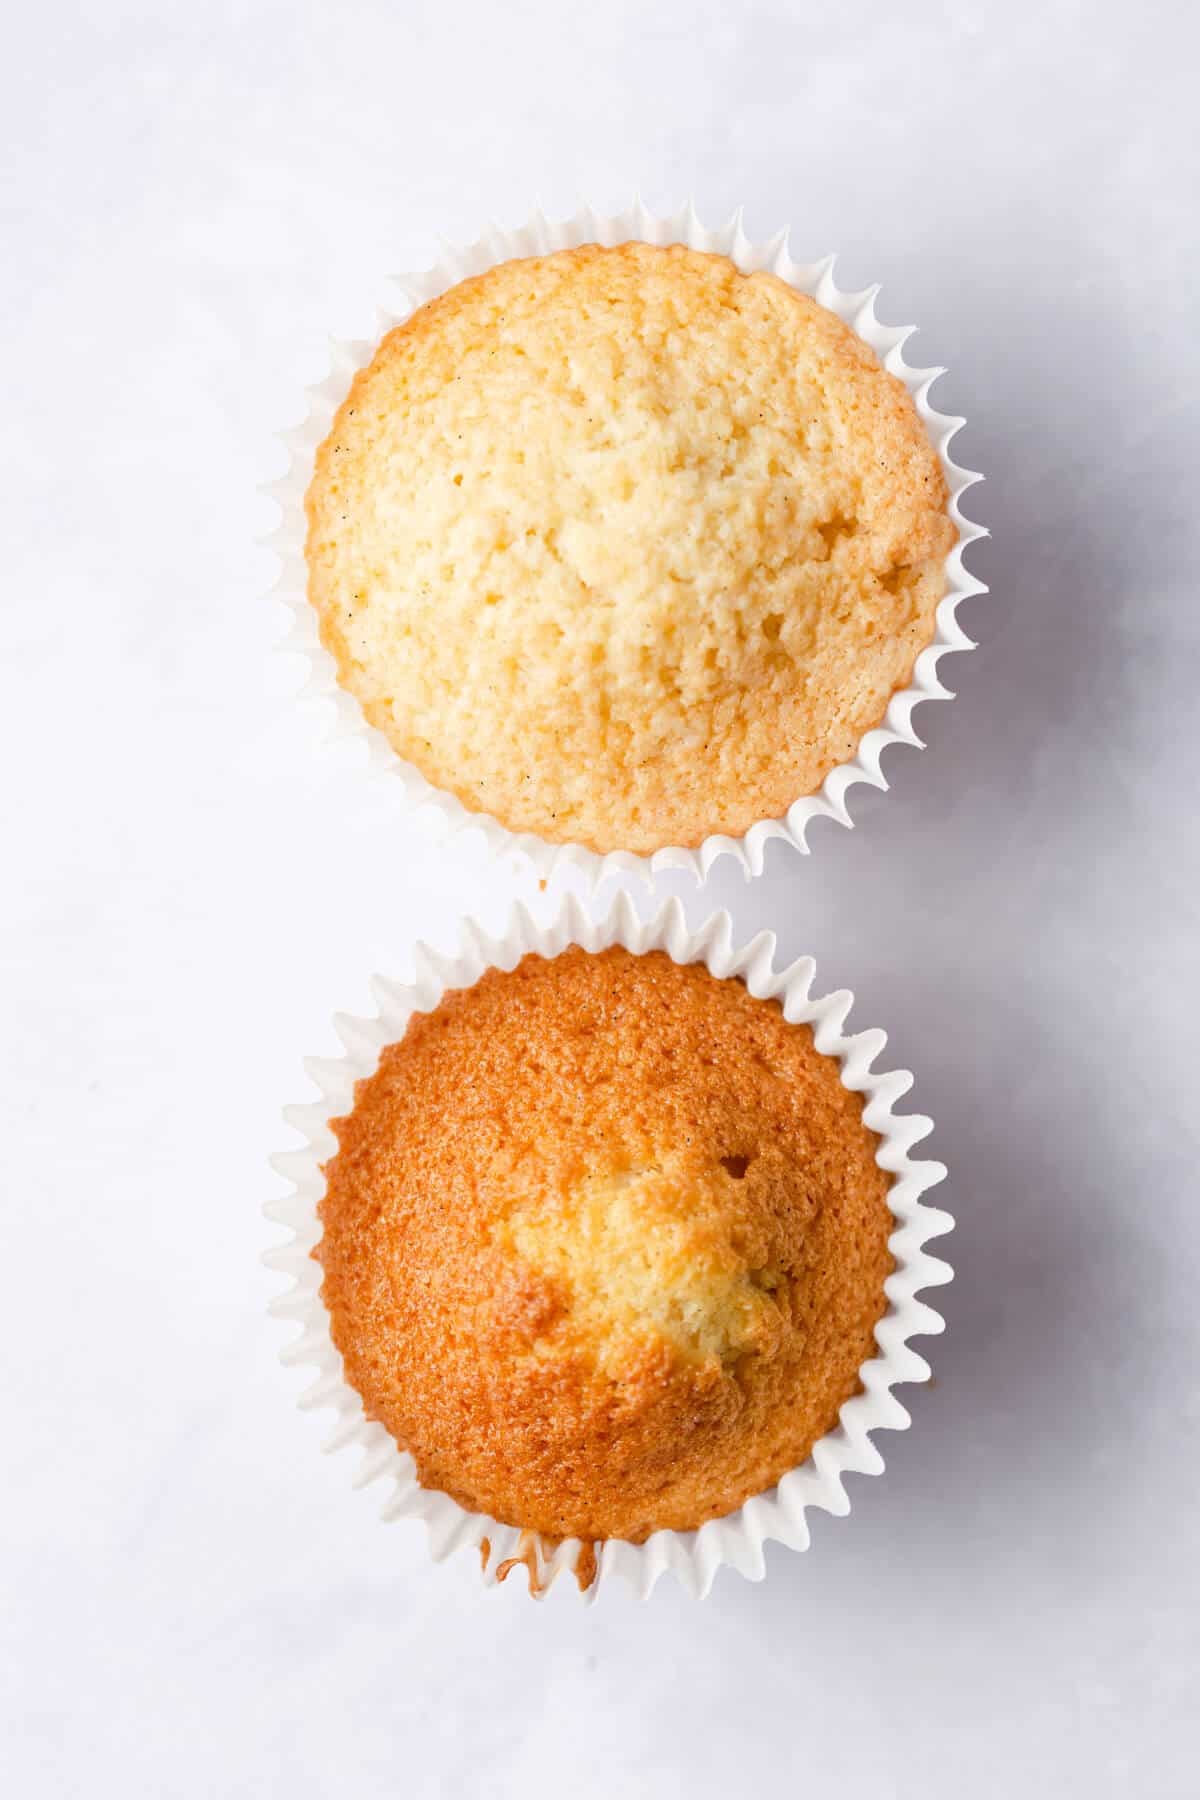 top view of two cupcakes showing different texture on top